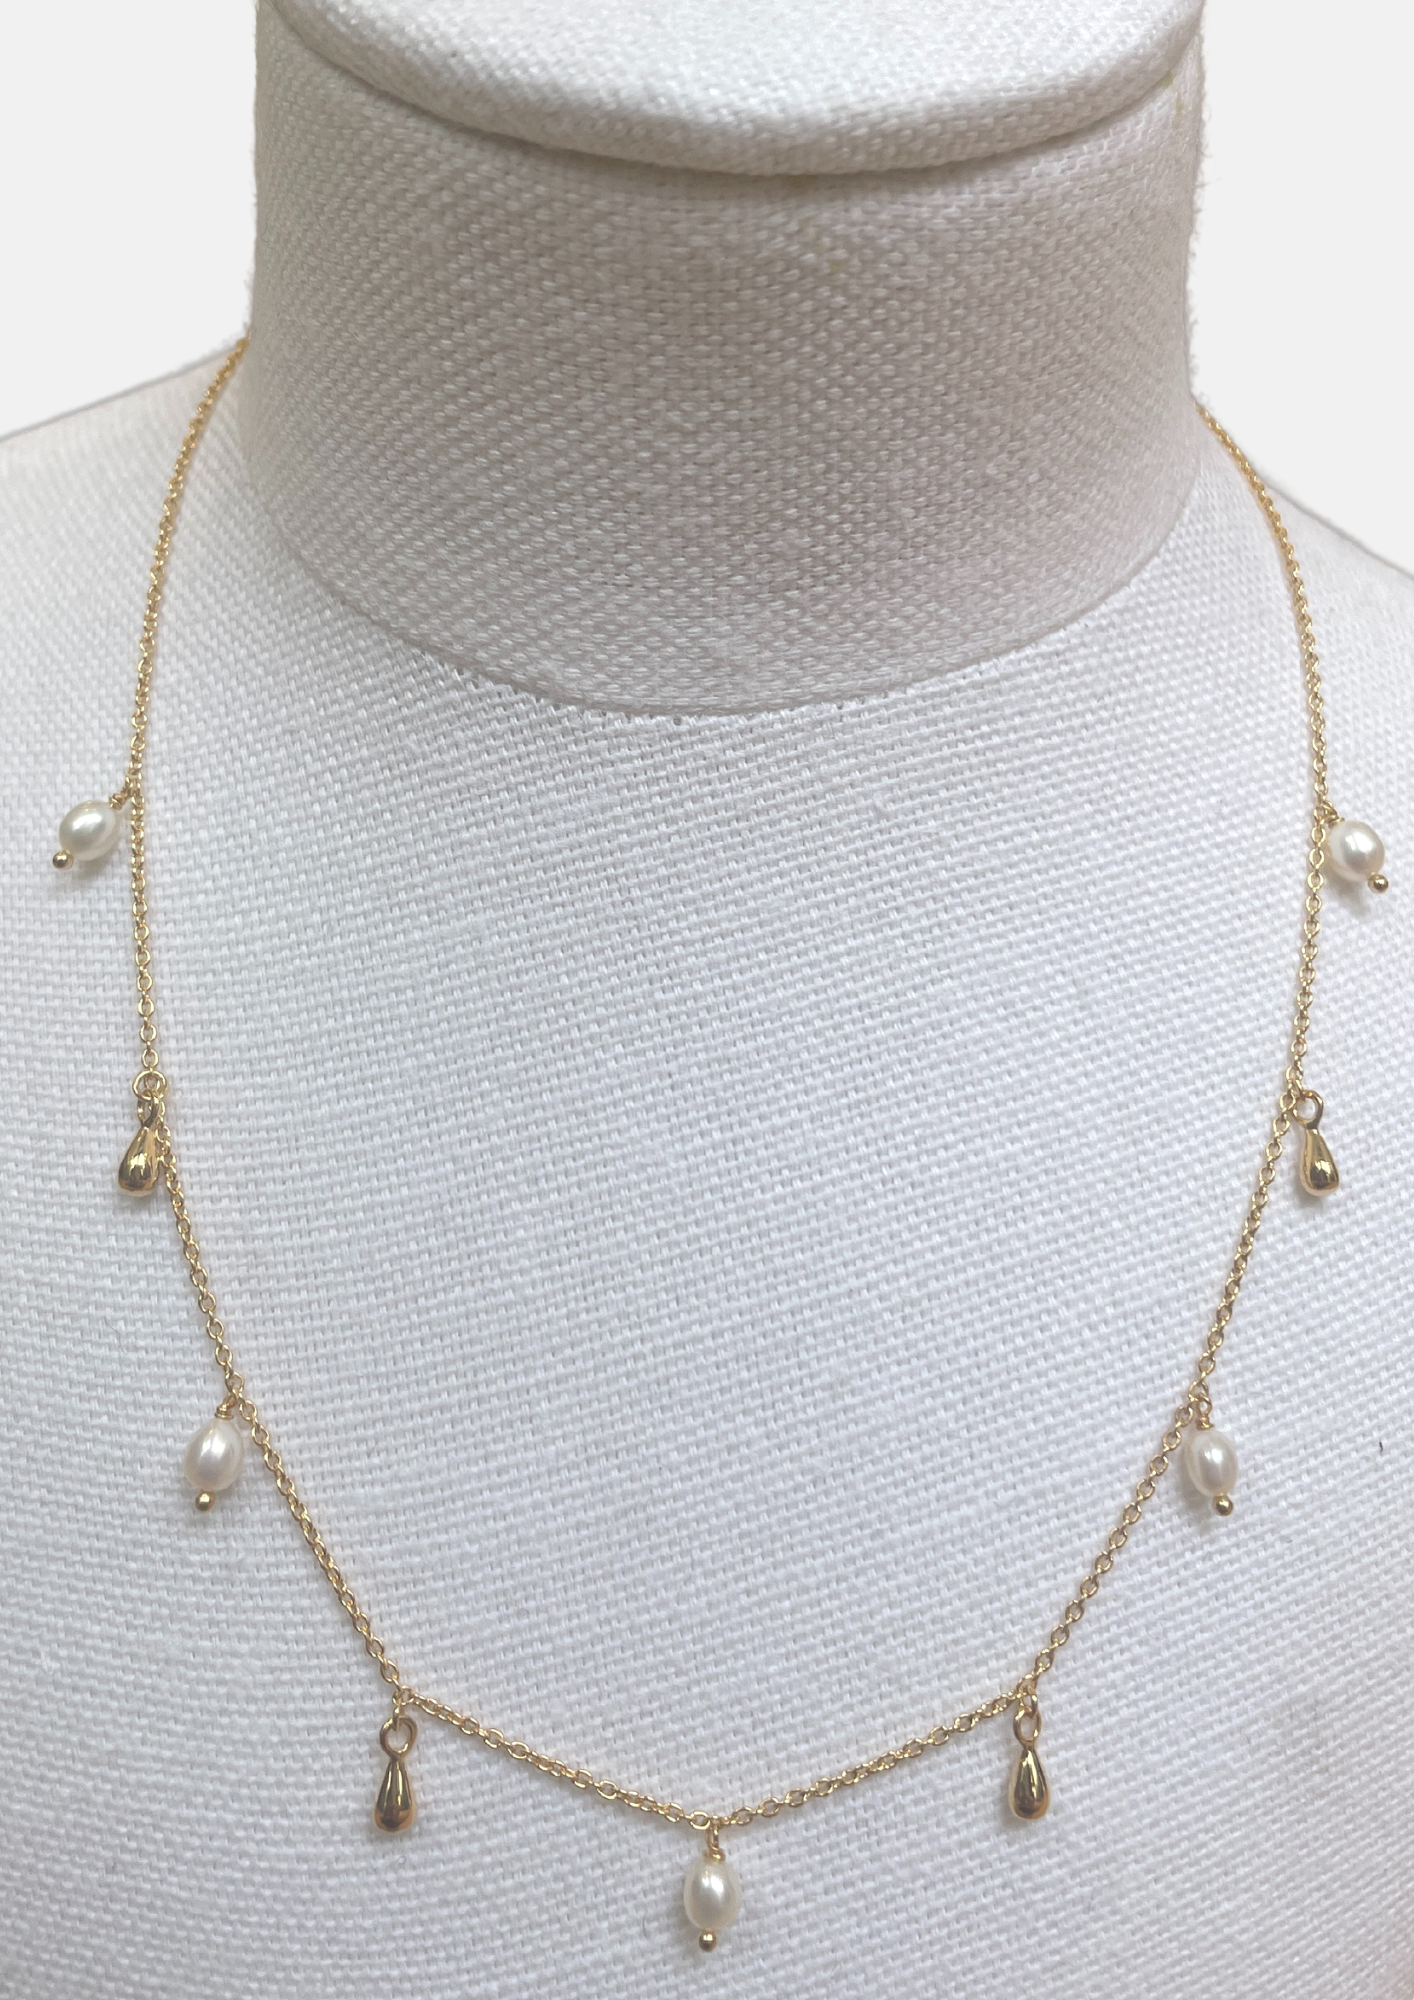 Choker necklace with gold plated chain and small pearl pendants